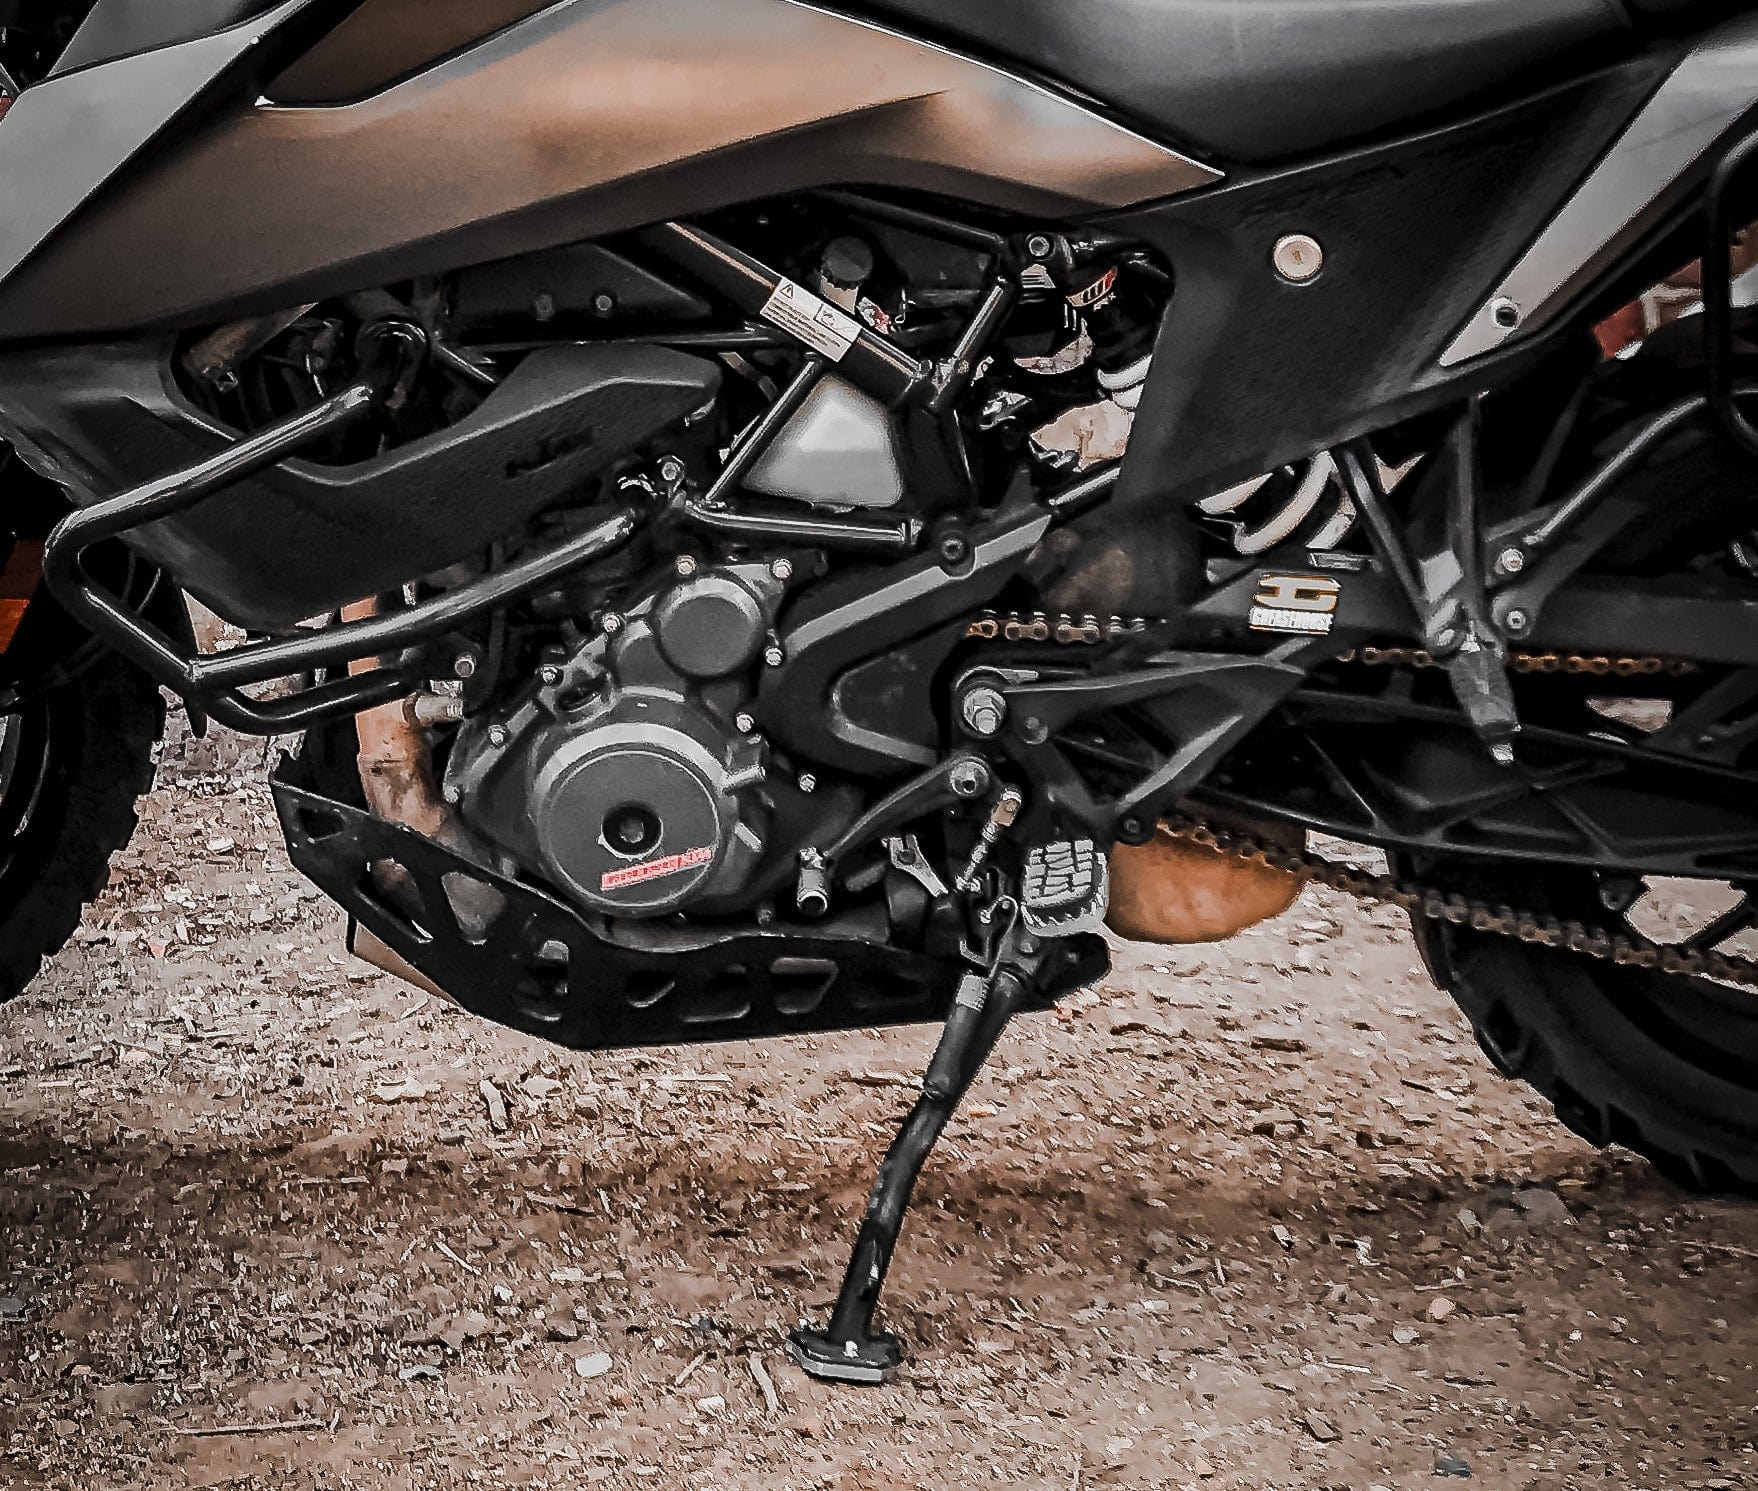 The Ultimate Combo Kit of 12 Accessories for KTM 250 Adventure